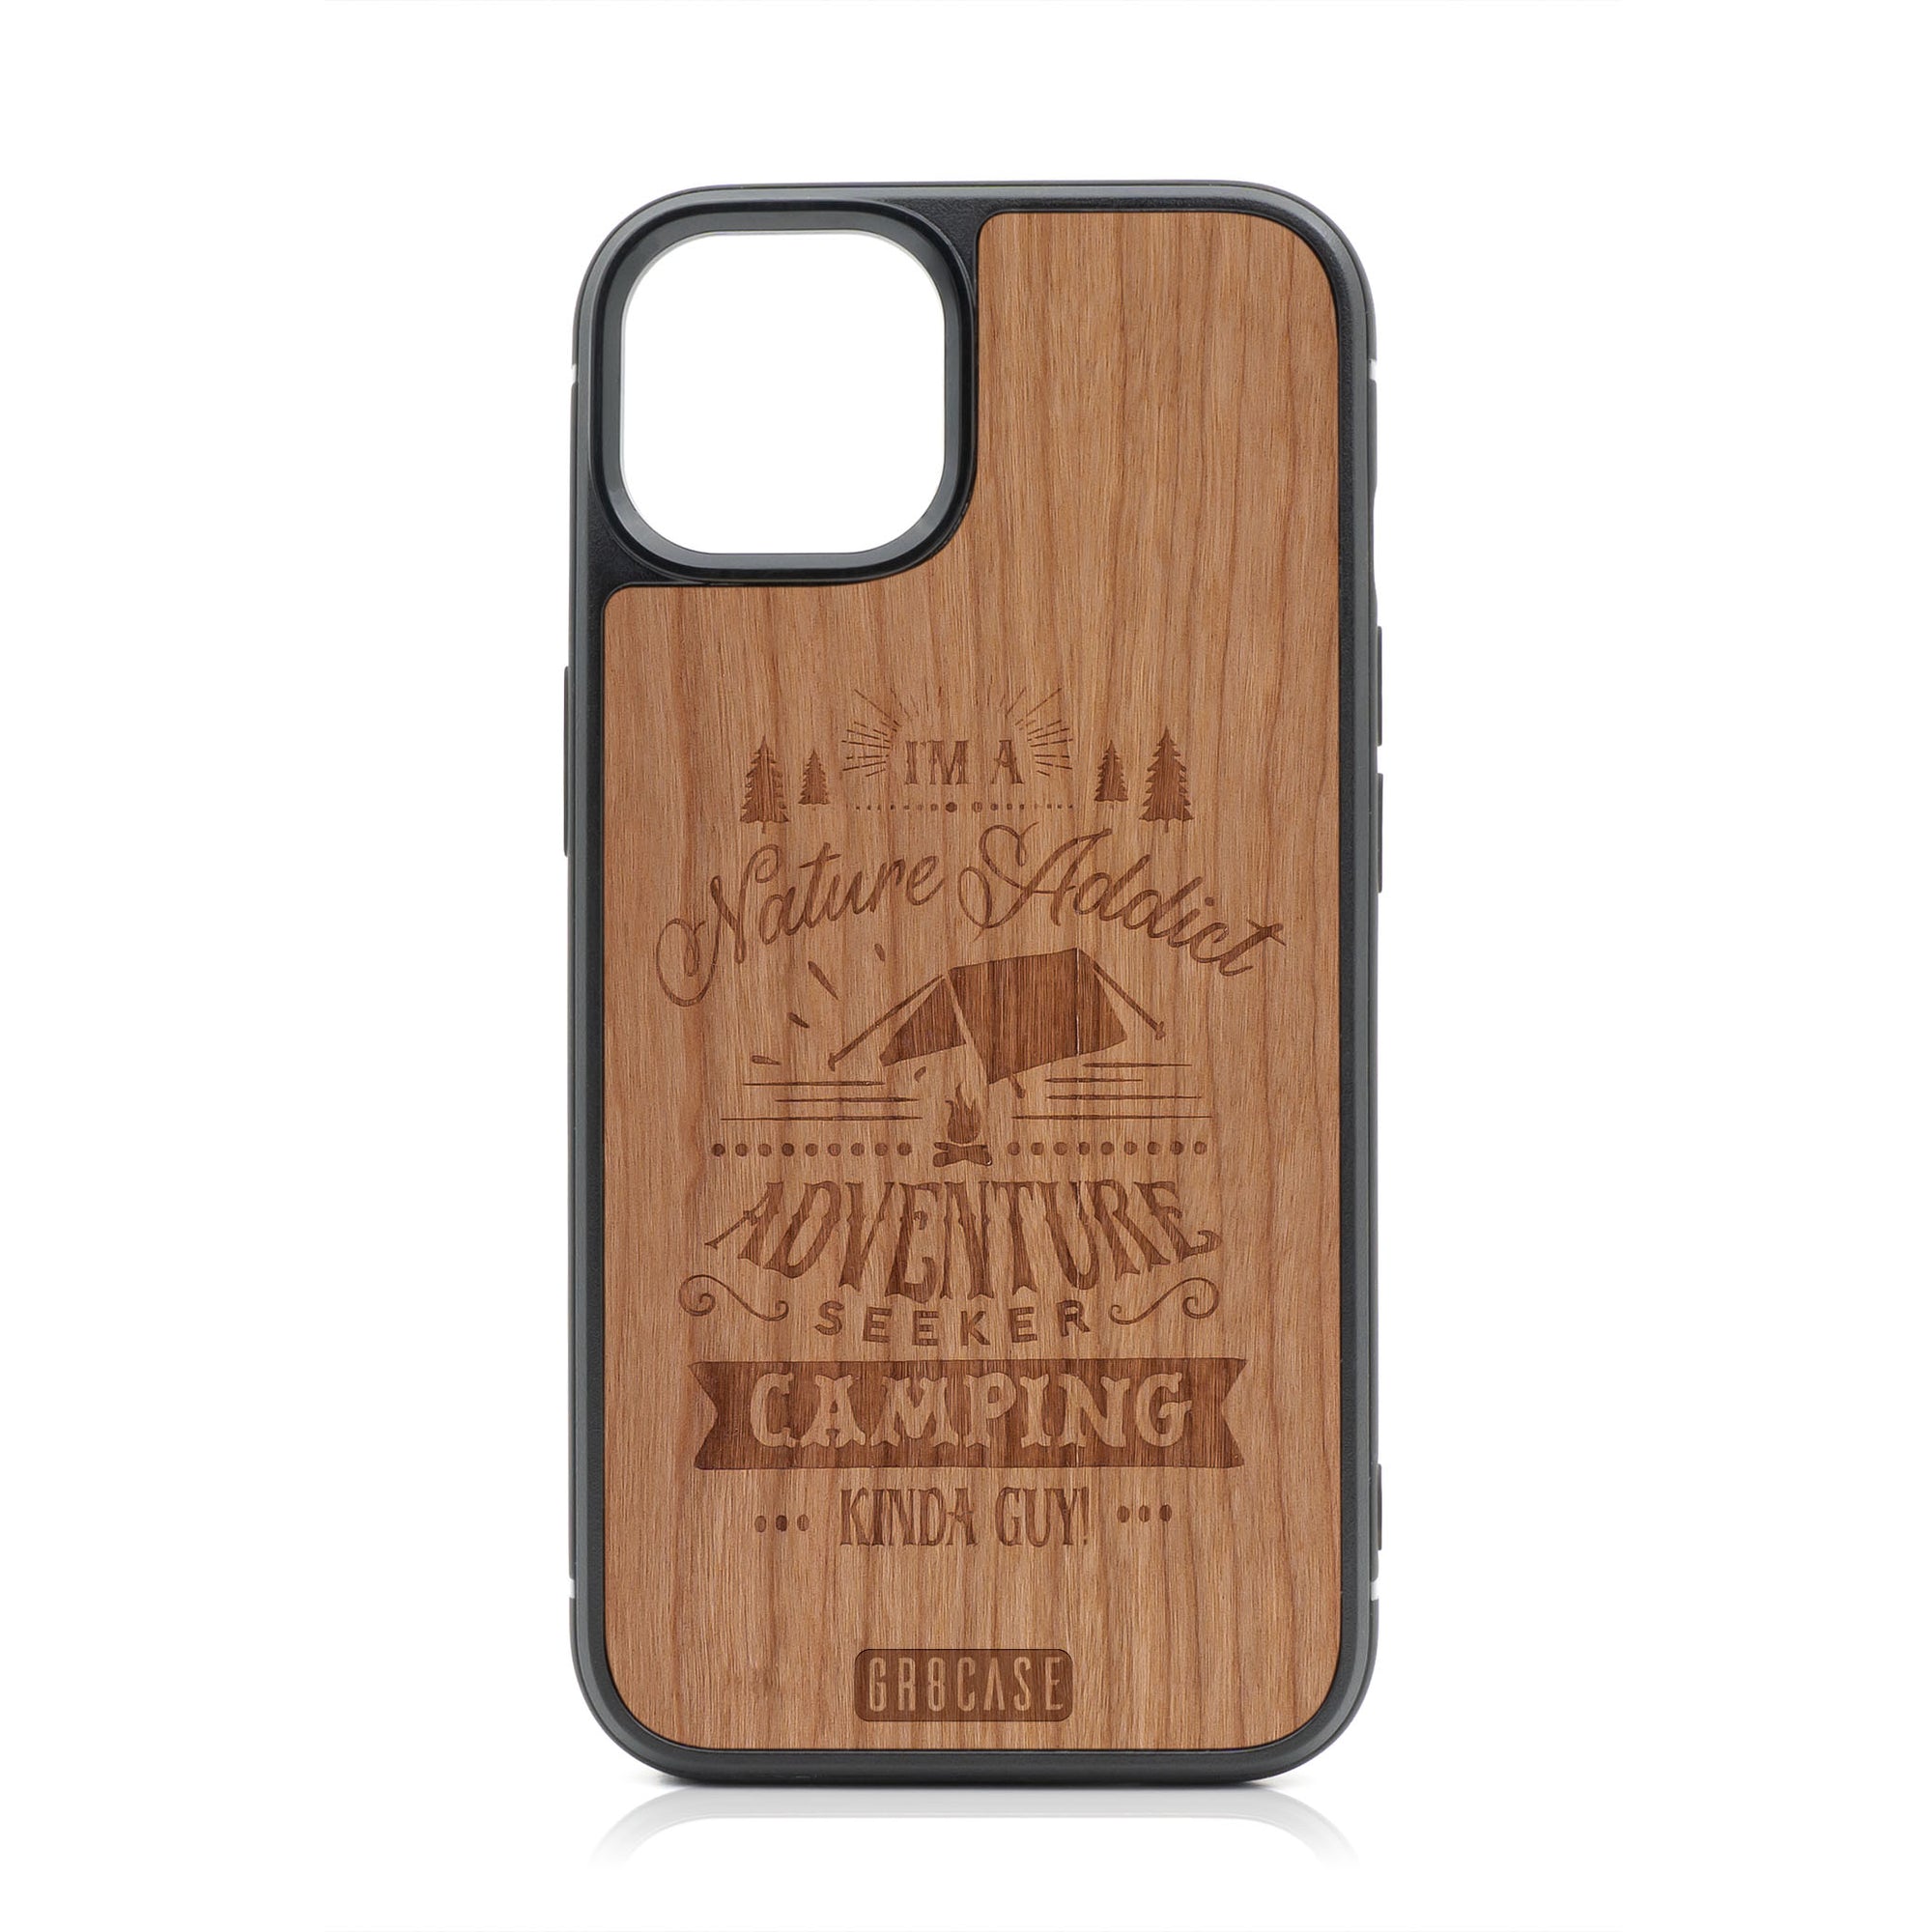 I'm A Nature Addict Adventure Seeker Camping Kinda Guy Design Wood Case For iPhone 13